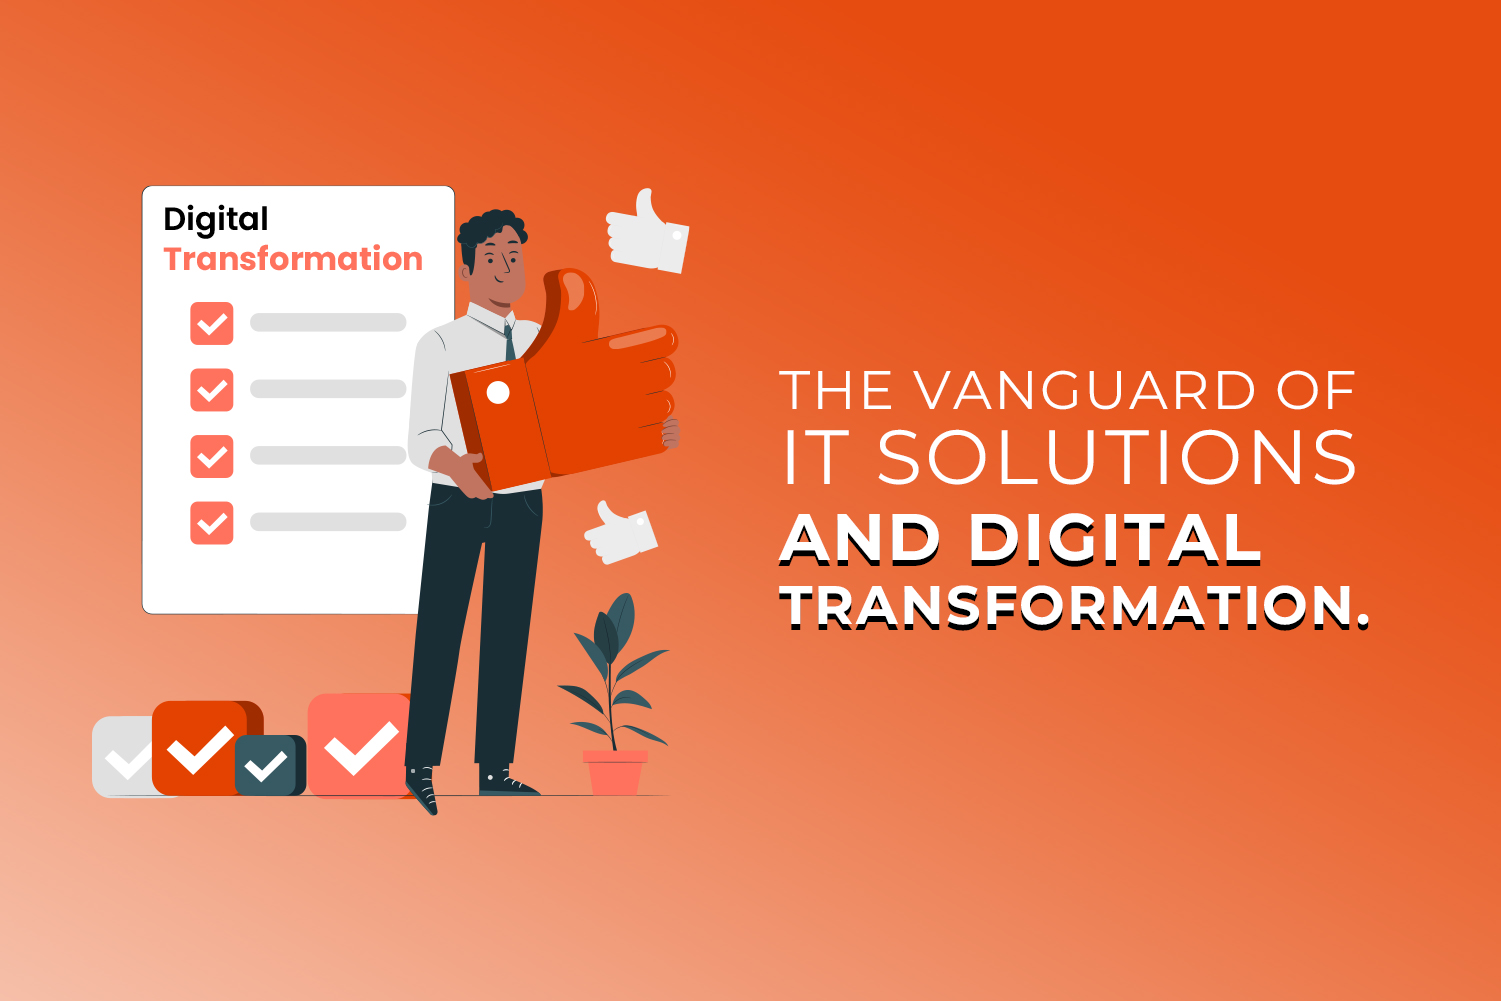 The Vanguard of IT Solutions